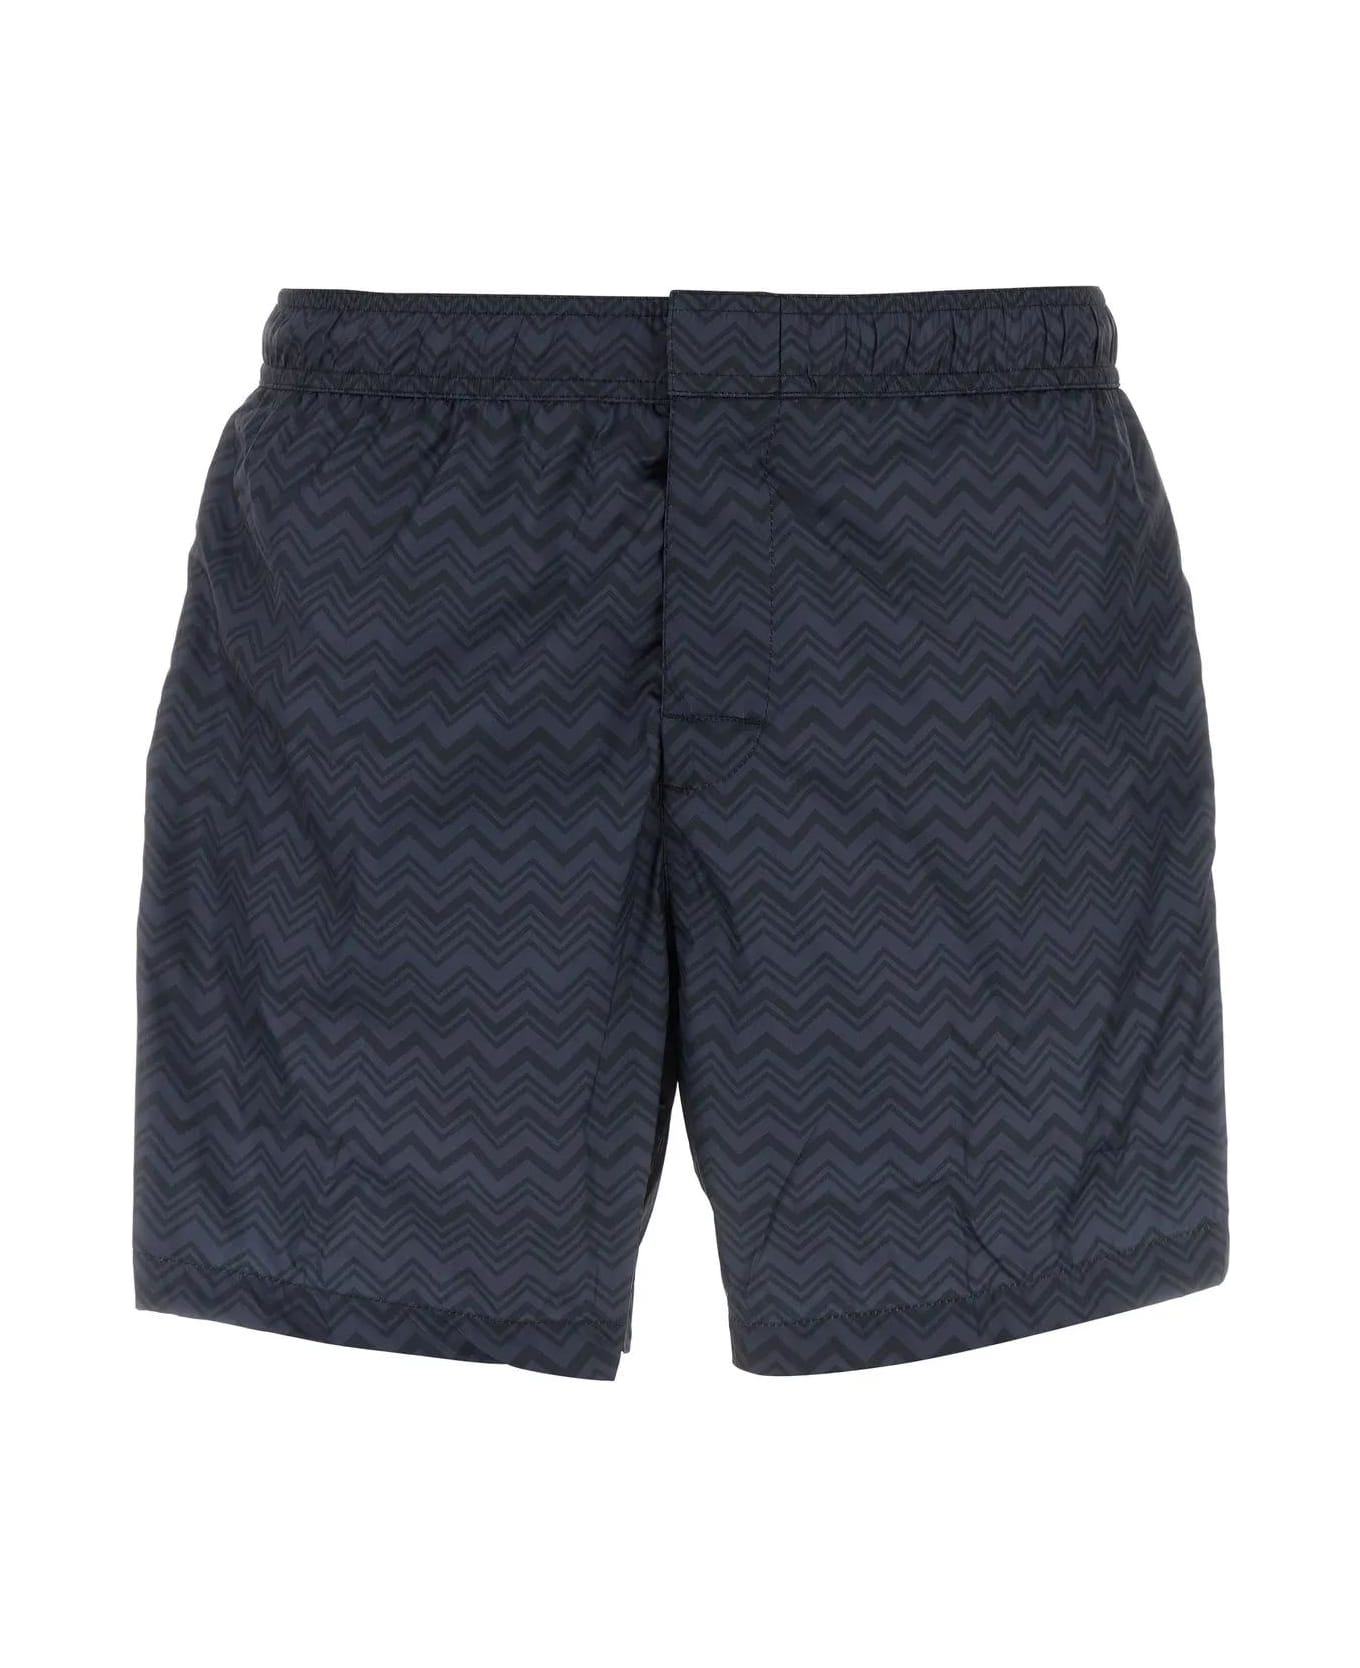 Missoni Printed Polyester Swimming Shorts - Navy Blue